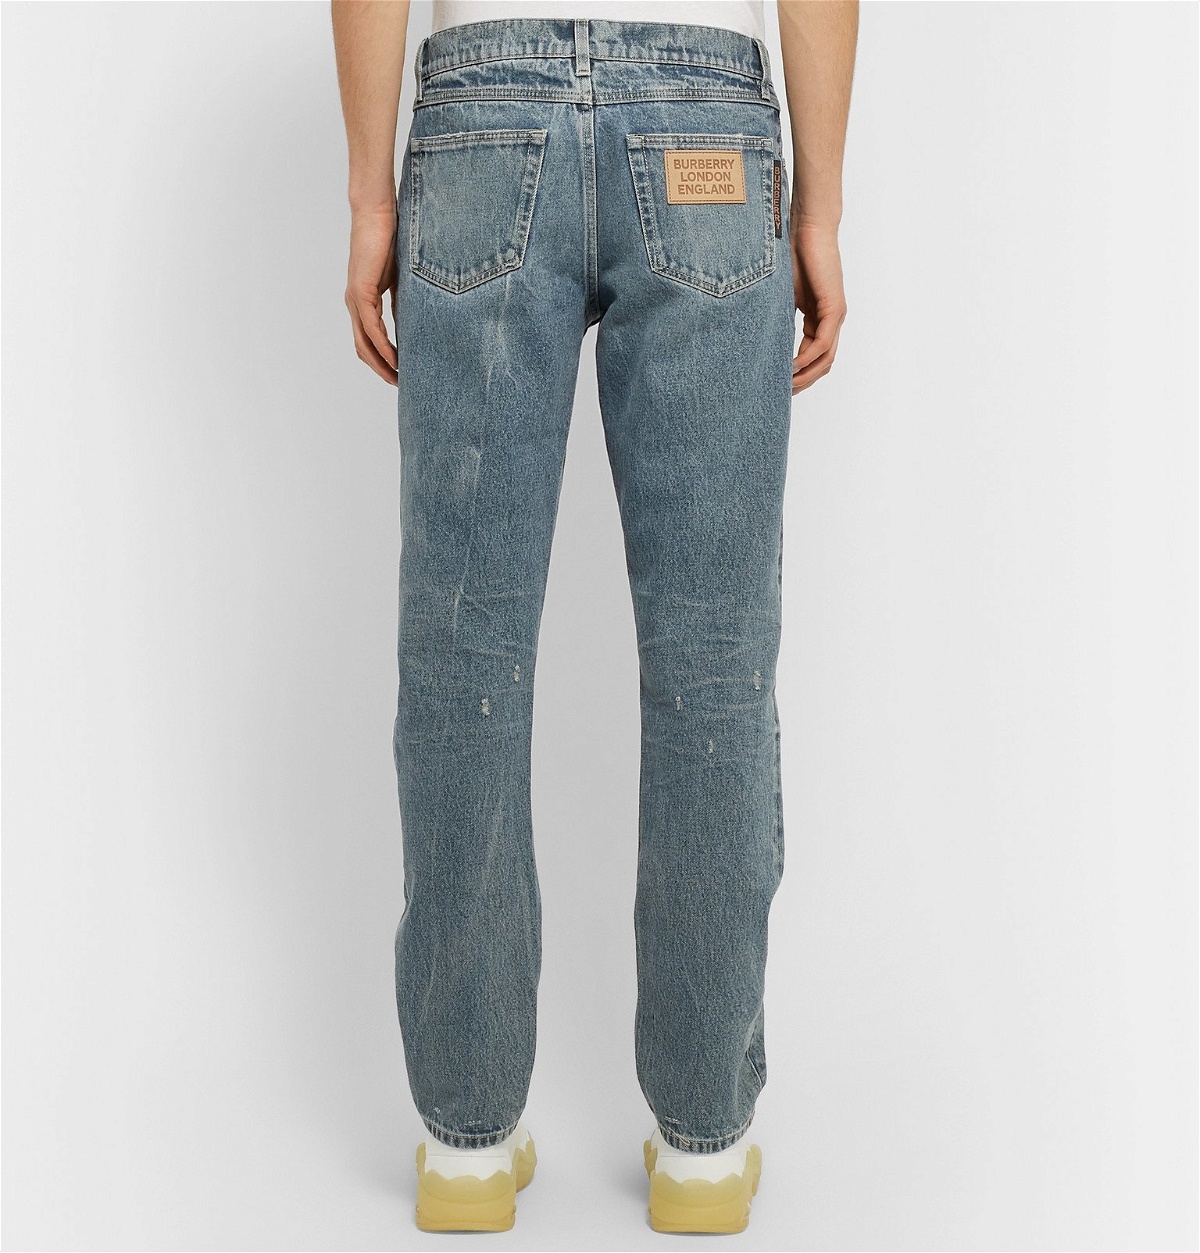 Burberry - Leather-Trimmed Distressed Denim Jeans - Blue Burberry